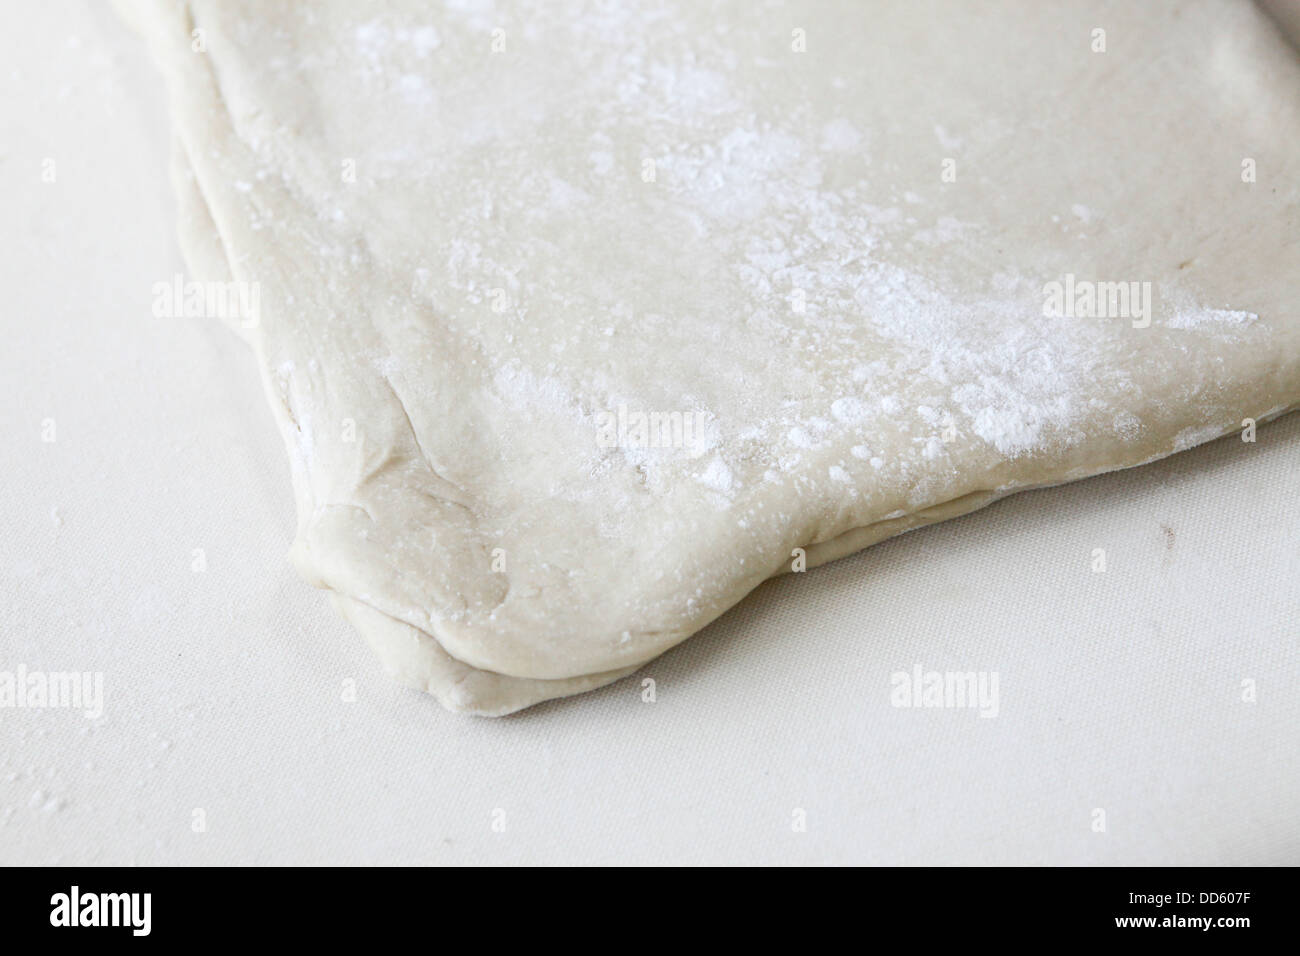 Making puff pastry at a bakery folded pastry Stock Photo